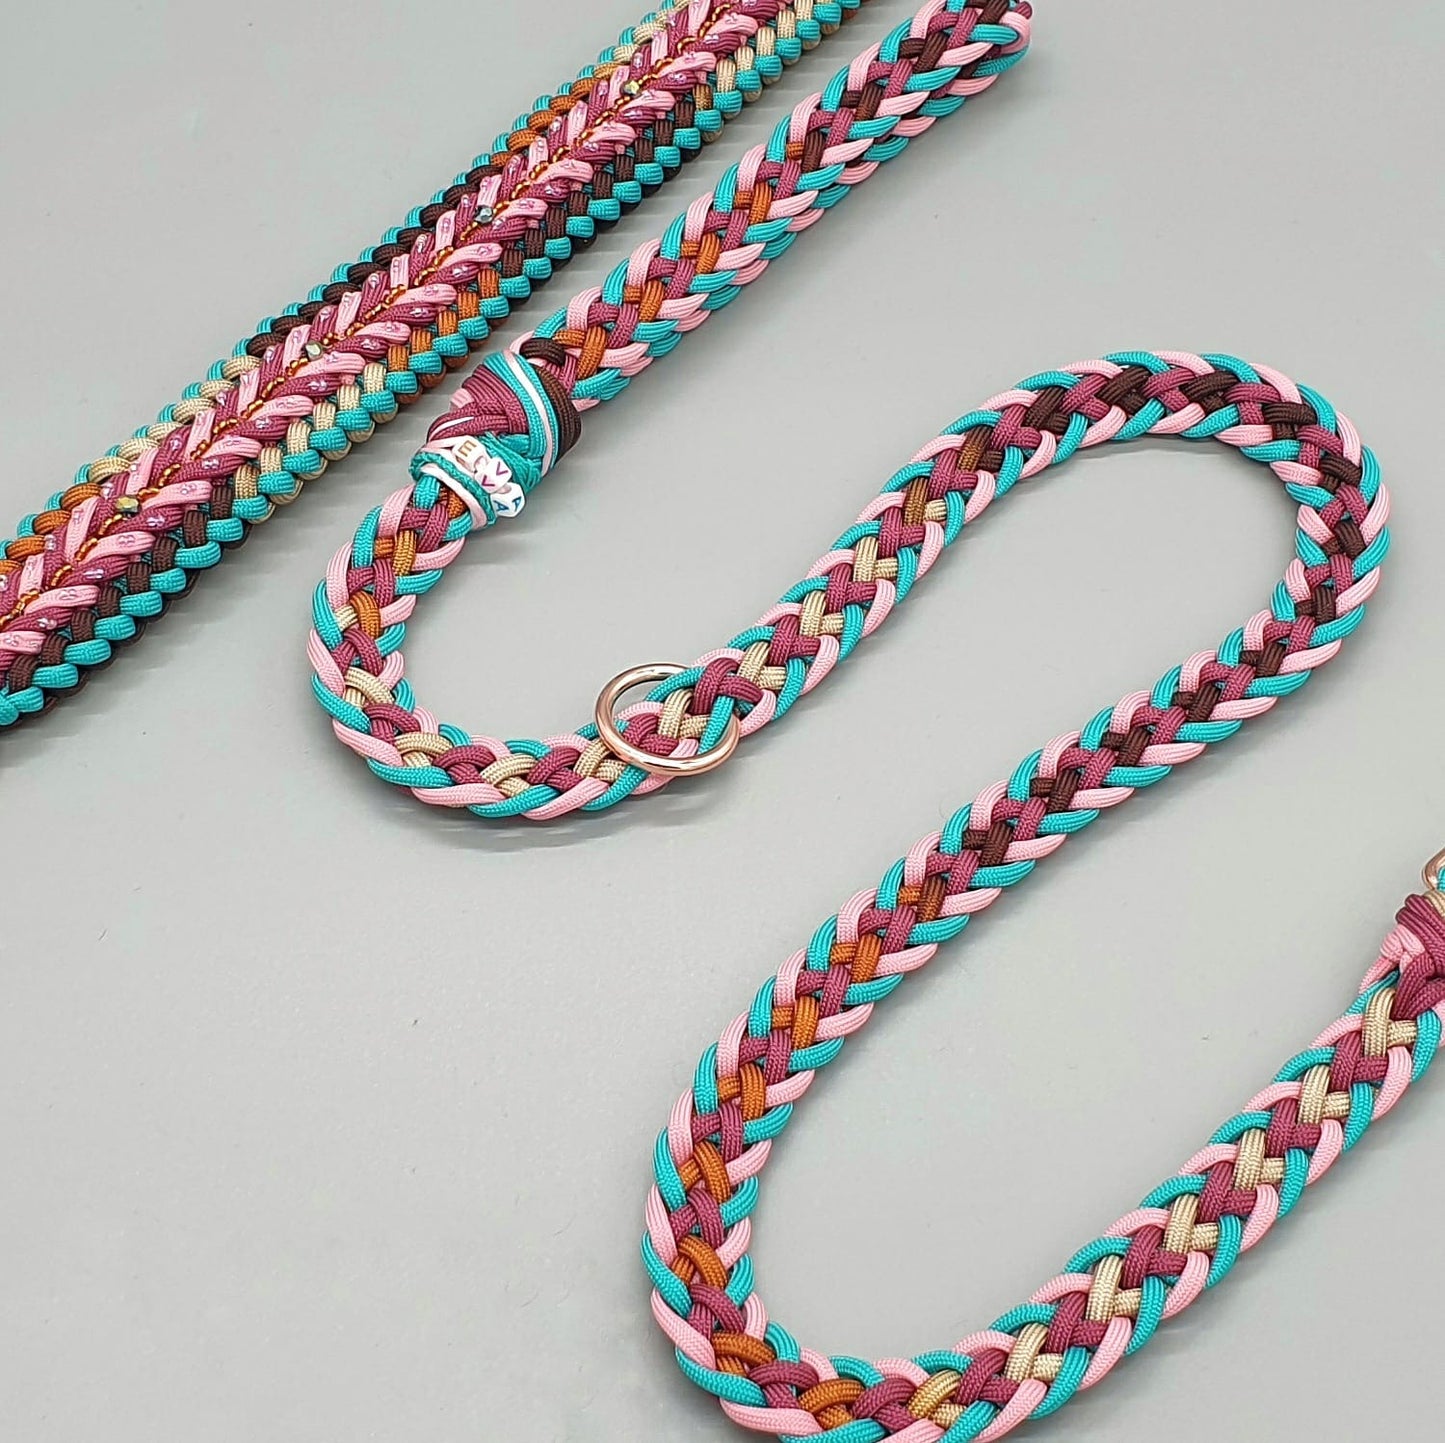 Paracord hand woven collar and leash. Exclusive design. Luxury accessories for your Pet.